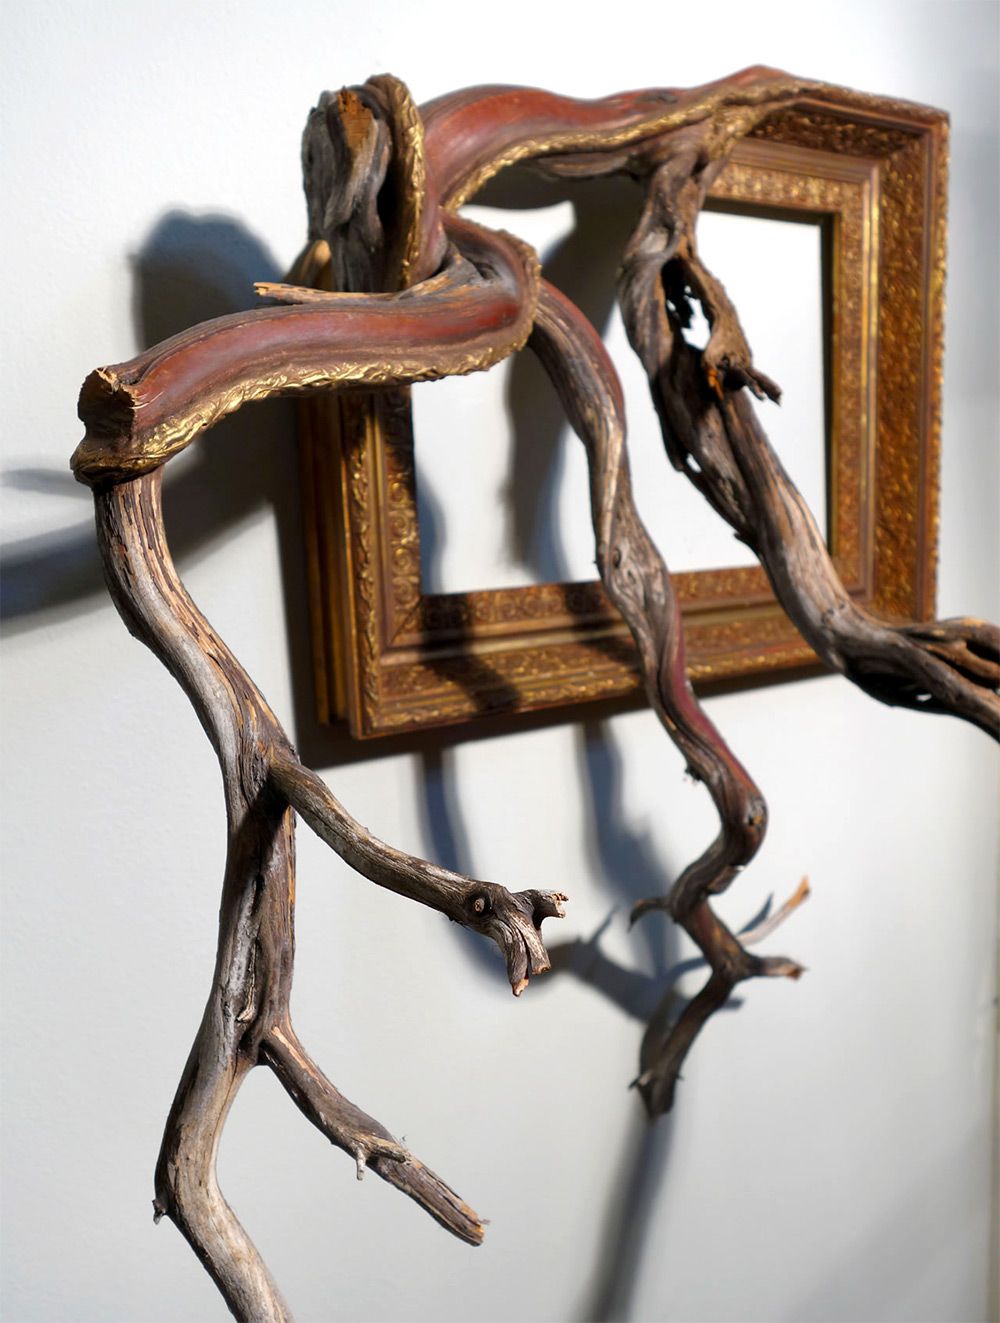 Tree Roots And Branches Fused With Ornate Picture Frames By Darryl Cox 8